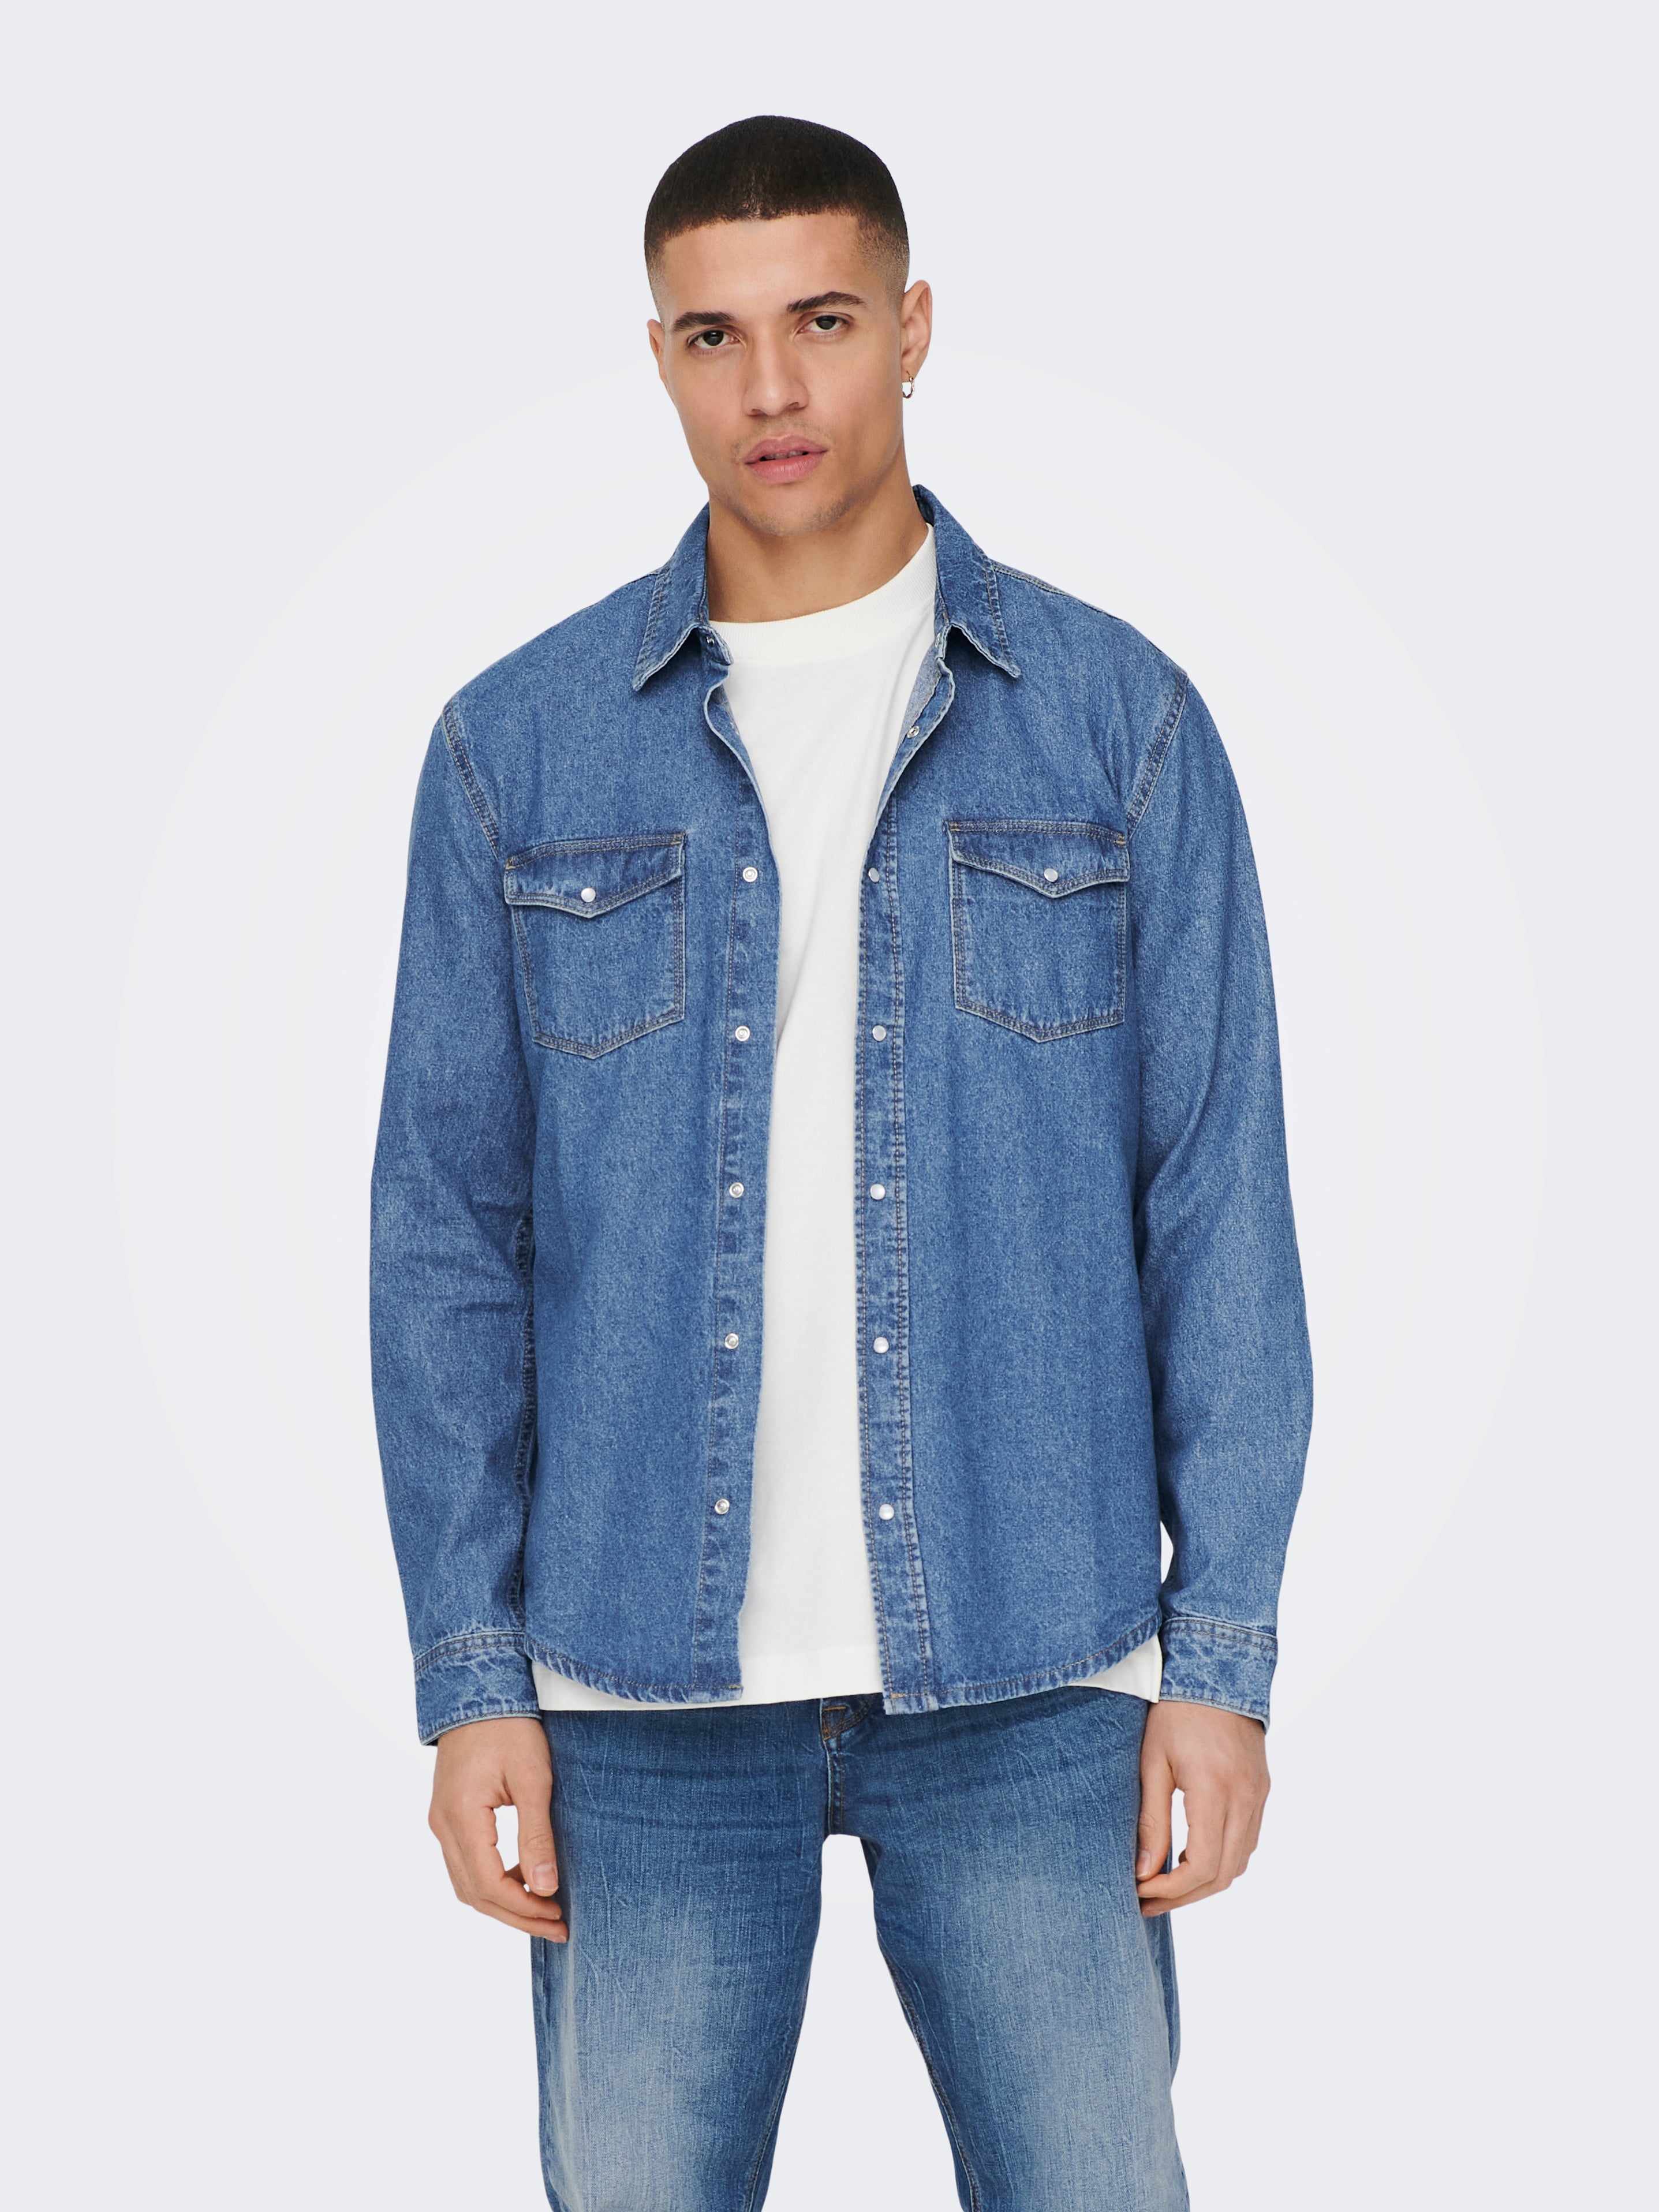 Lamps Lanterns And Lamp Shades Blue Denim Jeans Shirts - Buy Lamps Lanterns  And Lamp Shades Blue Denim Jeans Shirts online in India